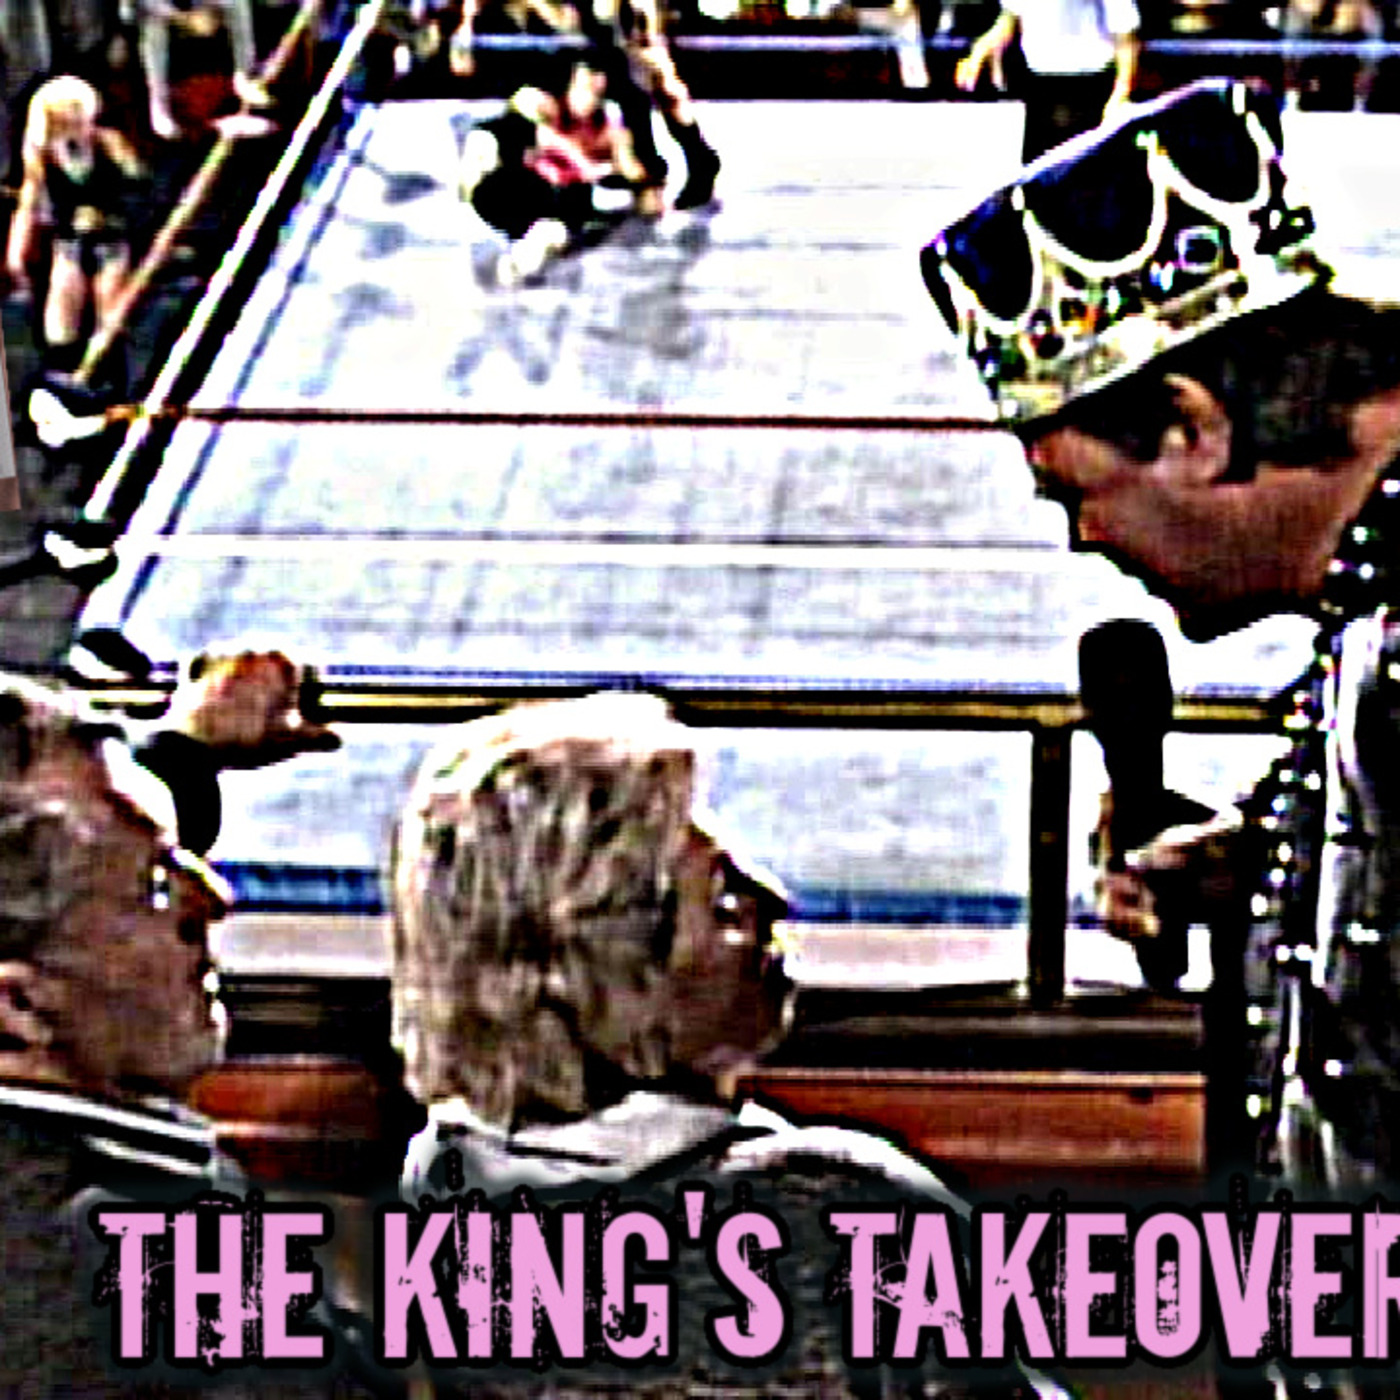 Episode 19: New Generation Declassified: The King's Takeover